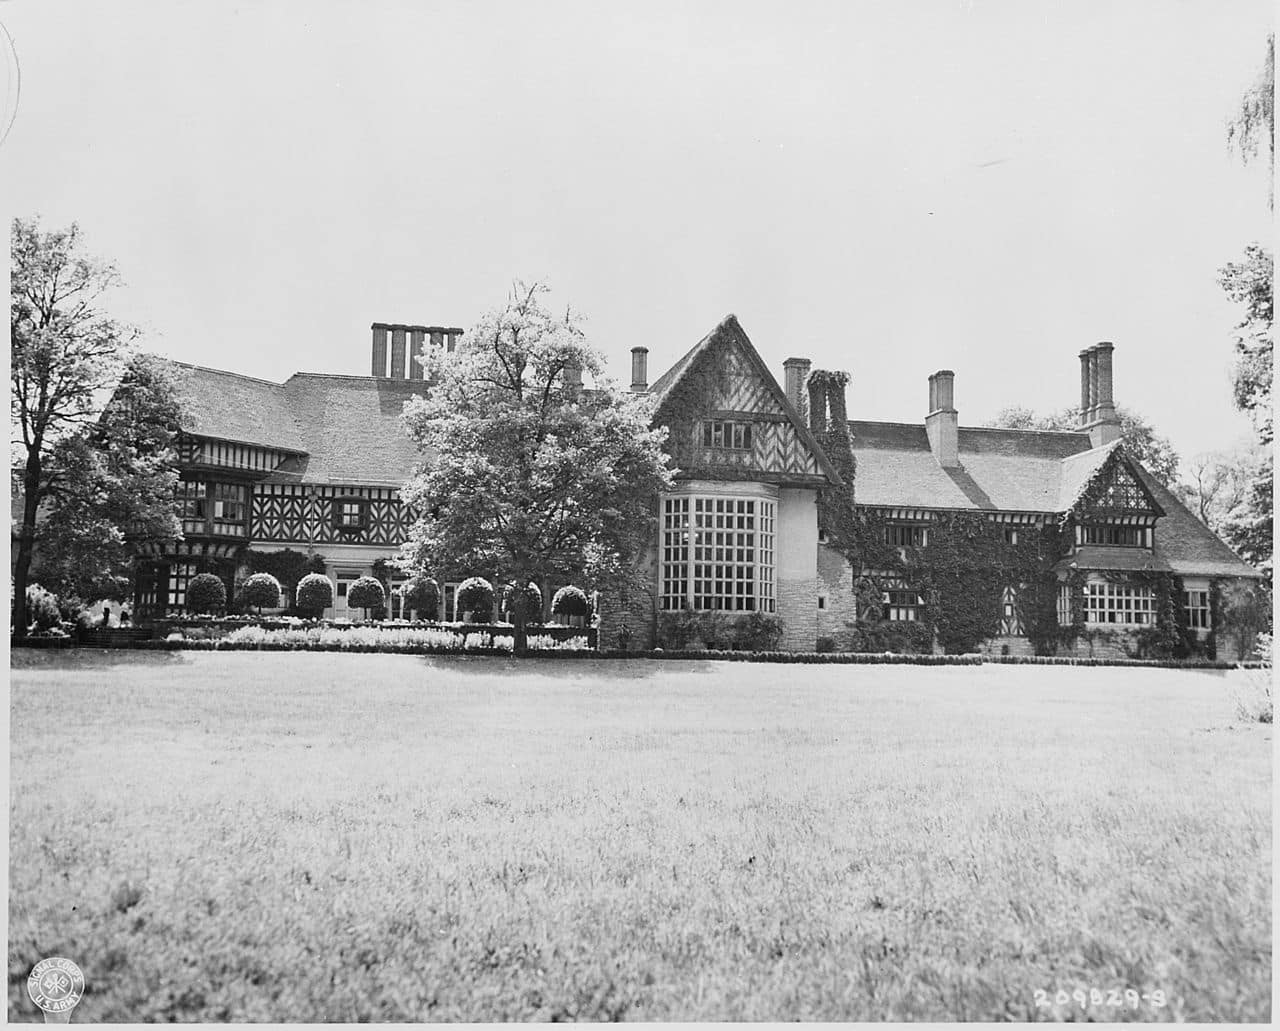 The Potsdam Conference - July 23rd 1945 - Schloss Cecilienhof as viewed from the river Havel side of the palace